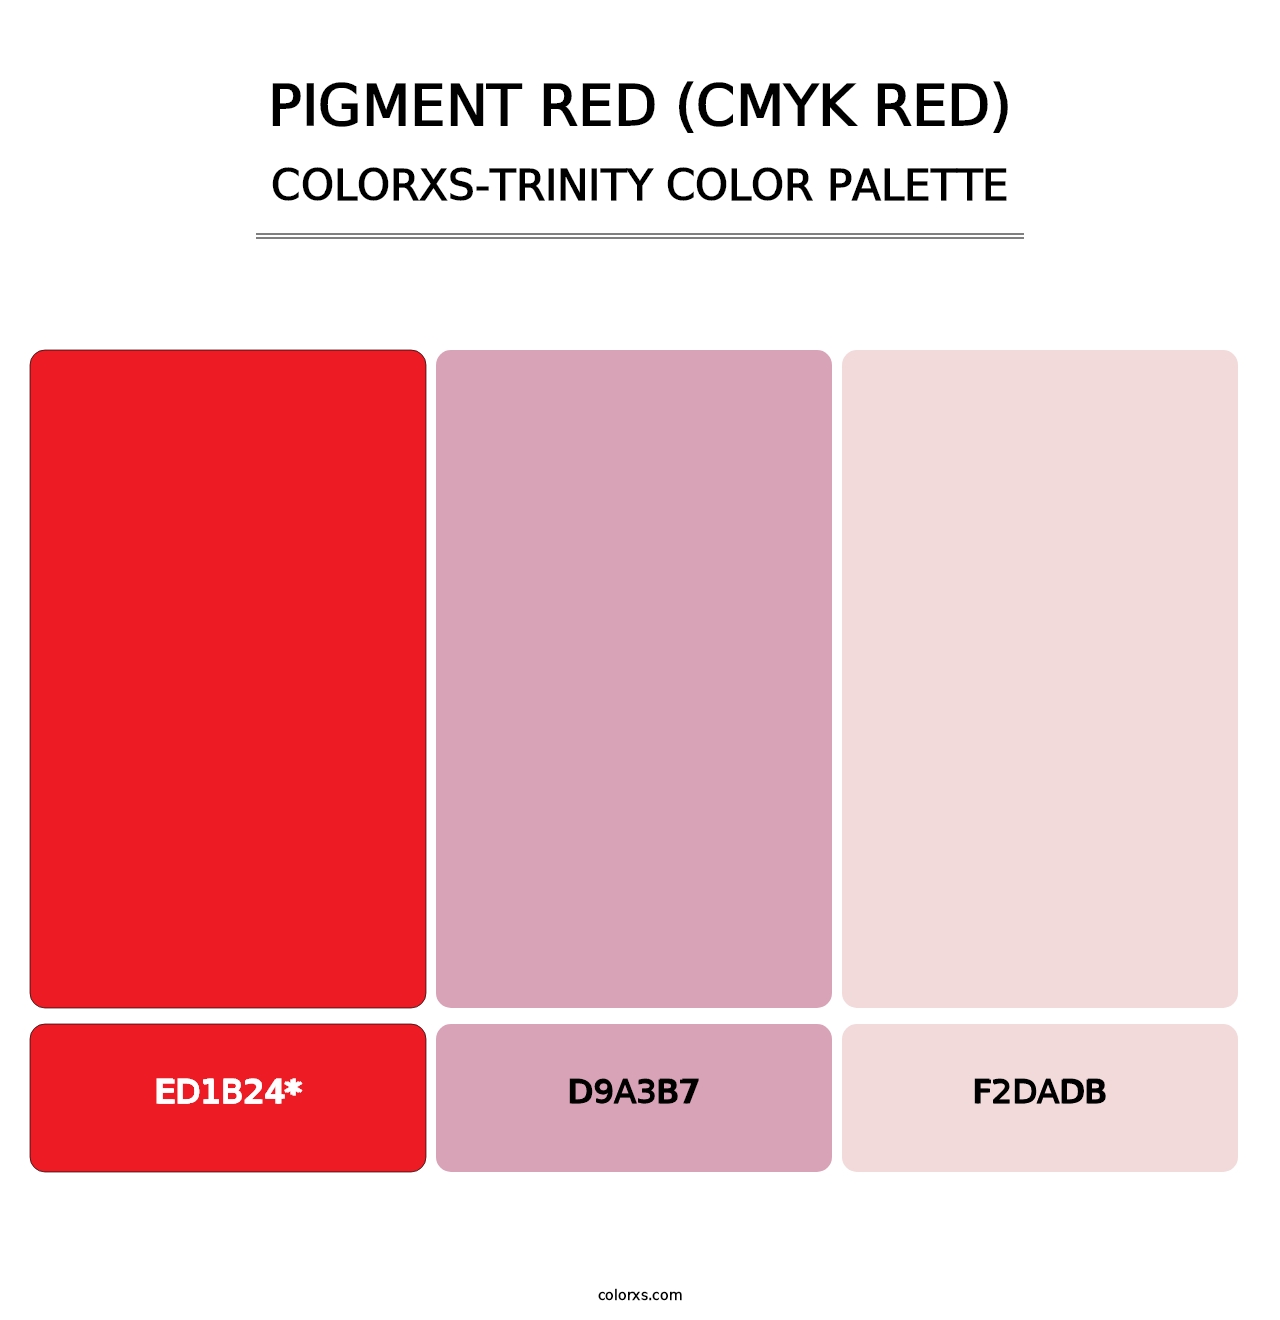 Pigment Red (CMYK Red) - Colorxs Trinity Palette